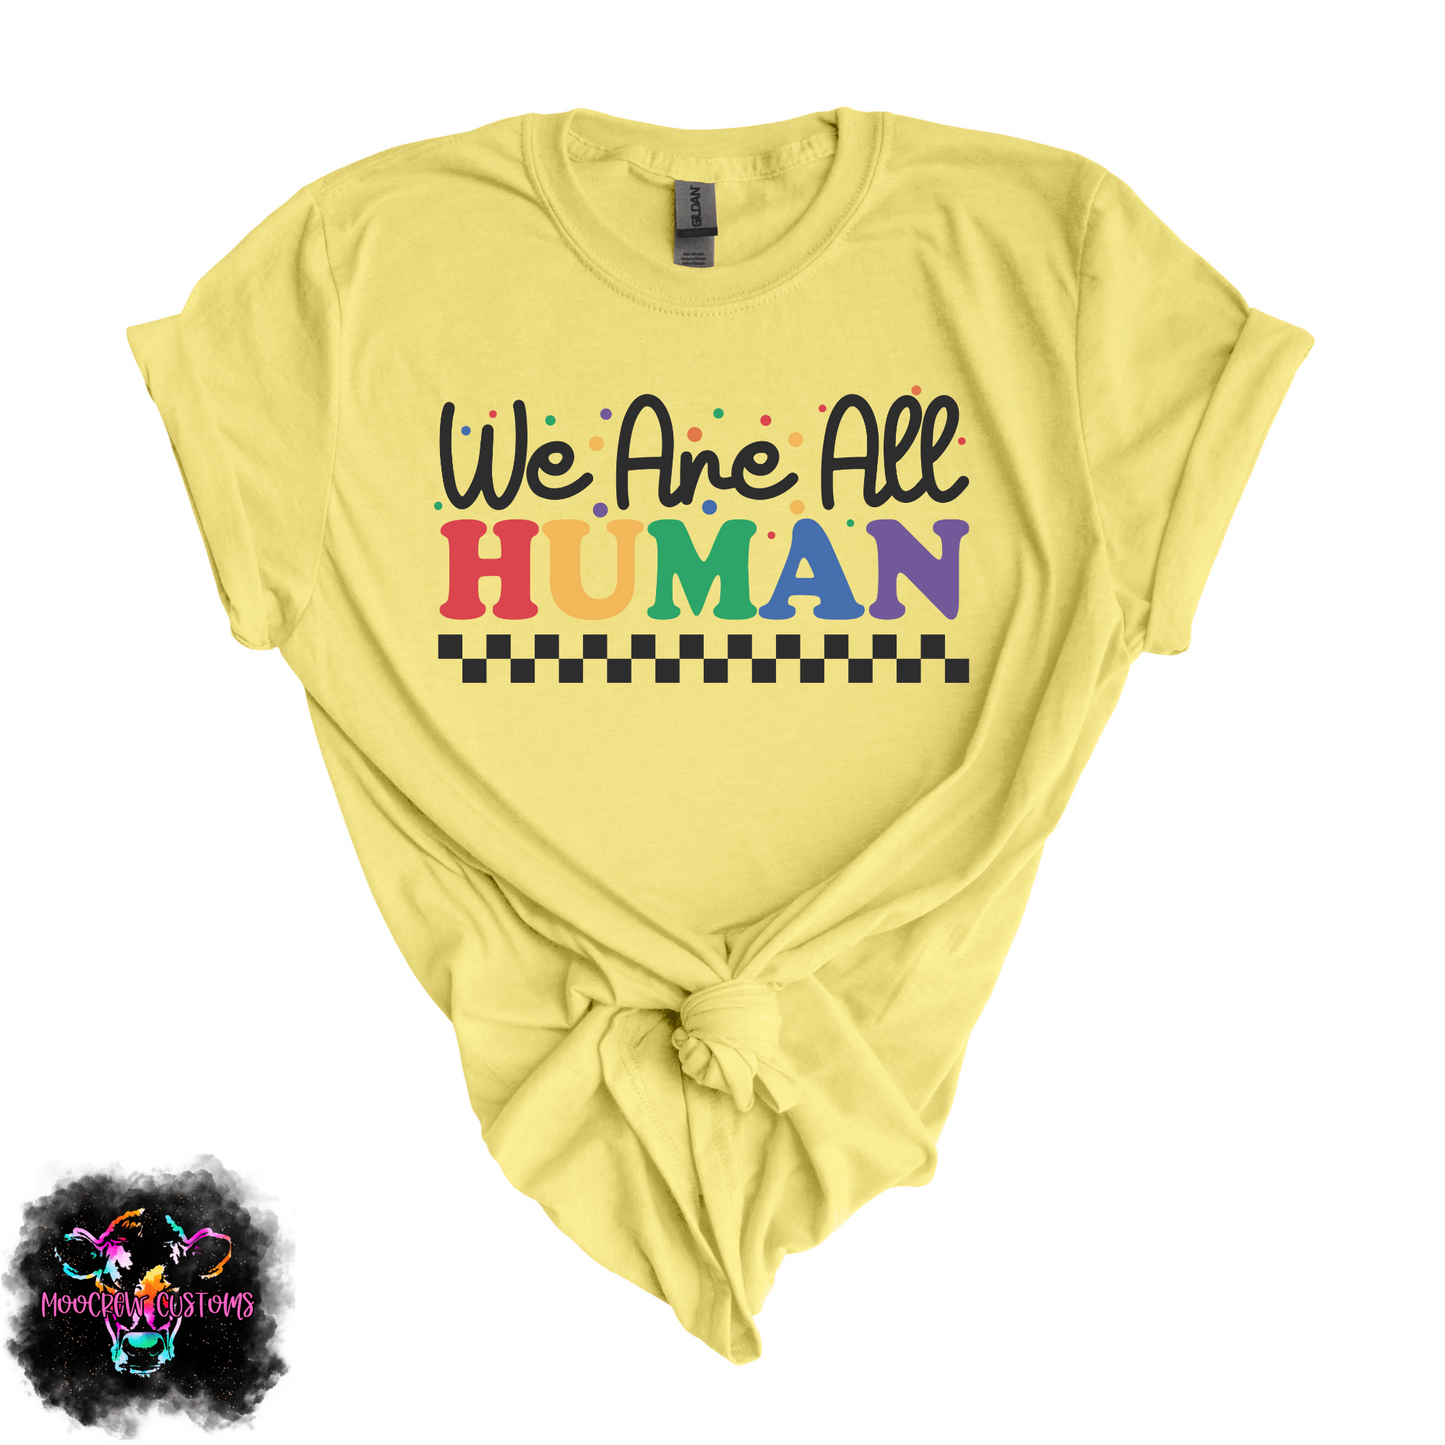 We Are All Human Tshirt